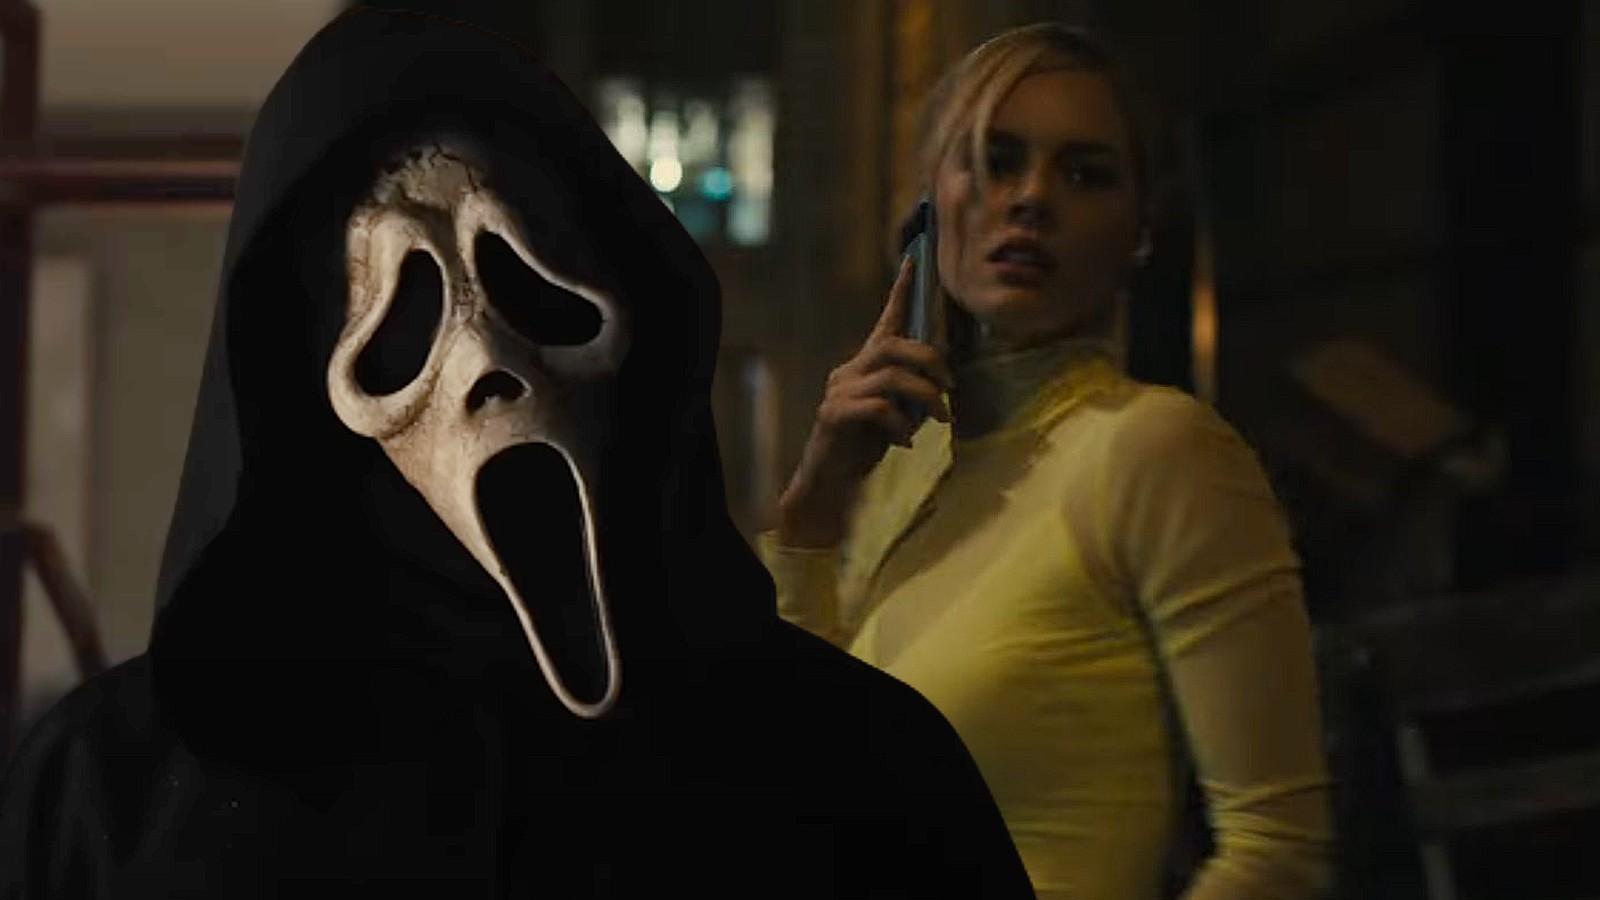 Scream 6 Ending Explained: Who Is Ghostface This Time?